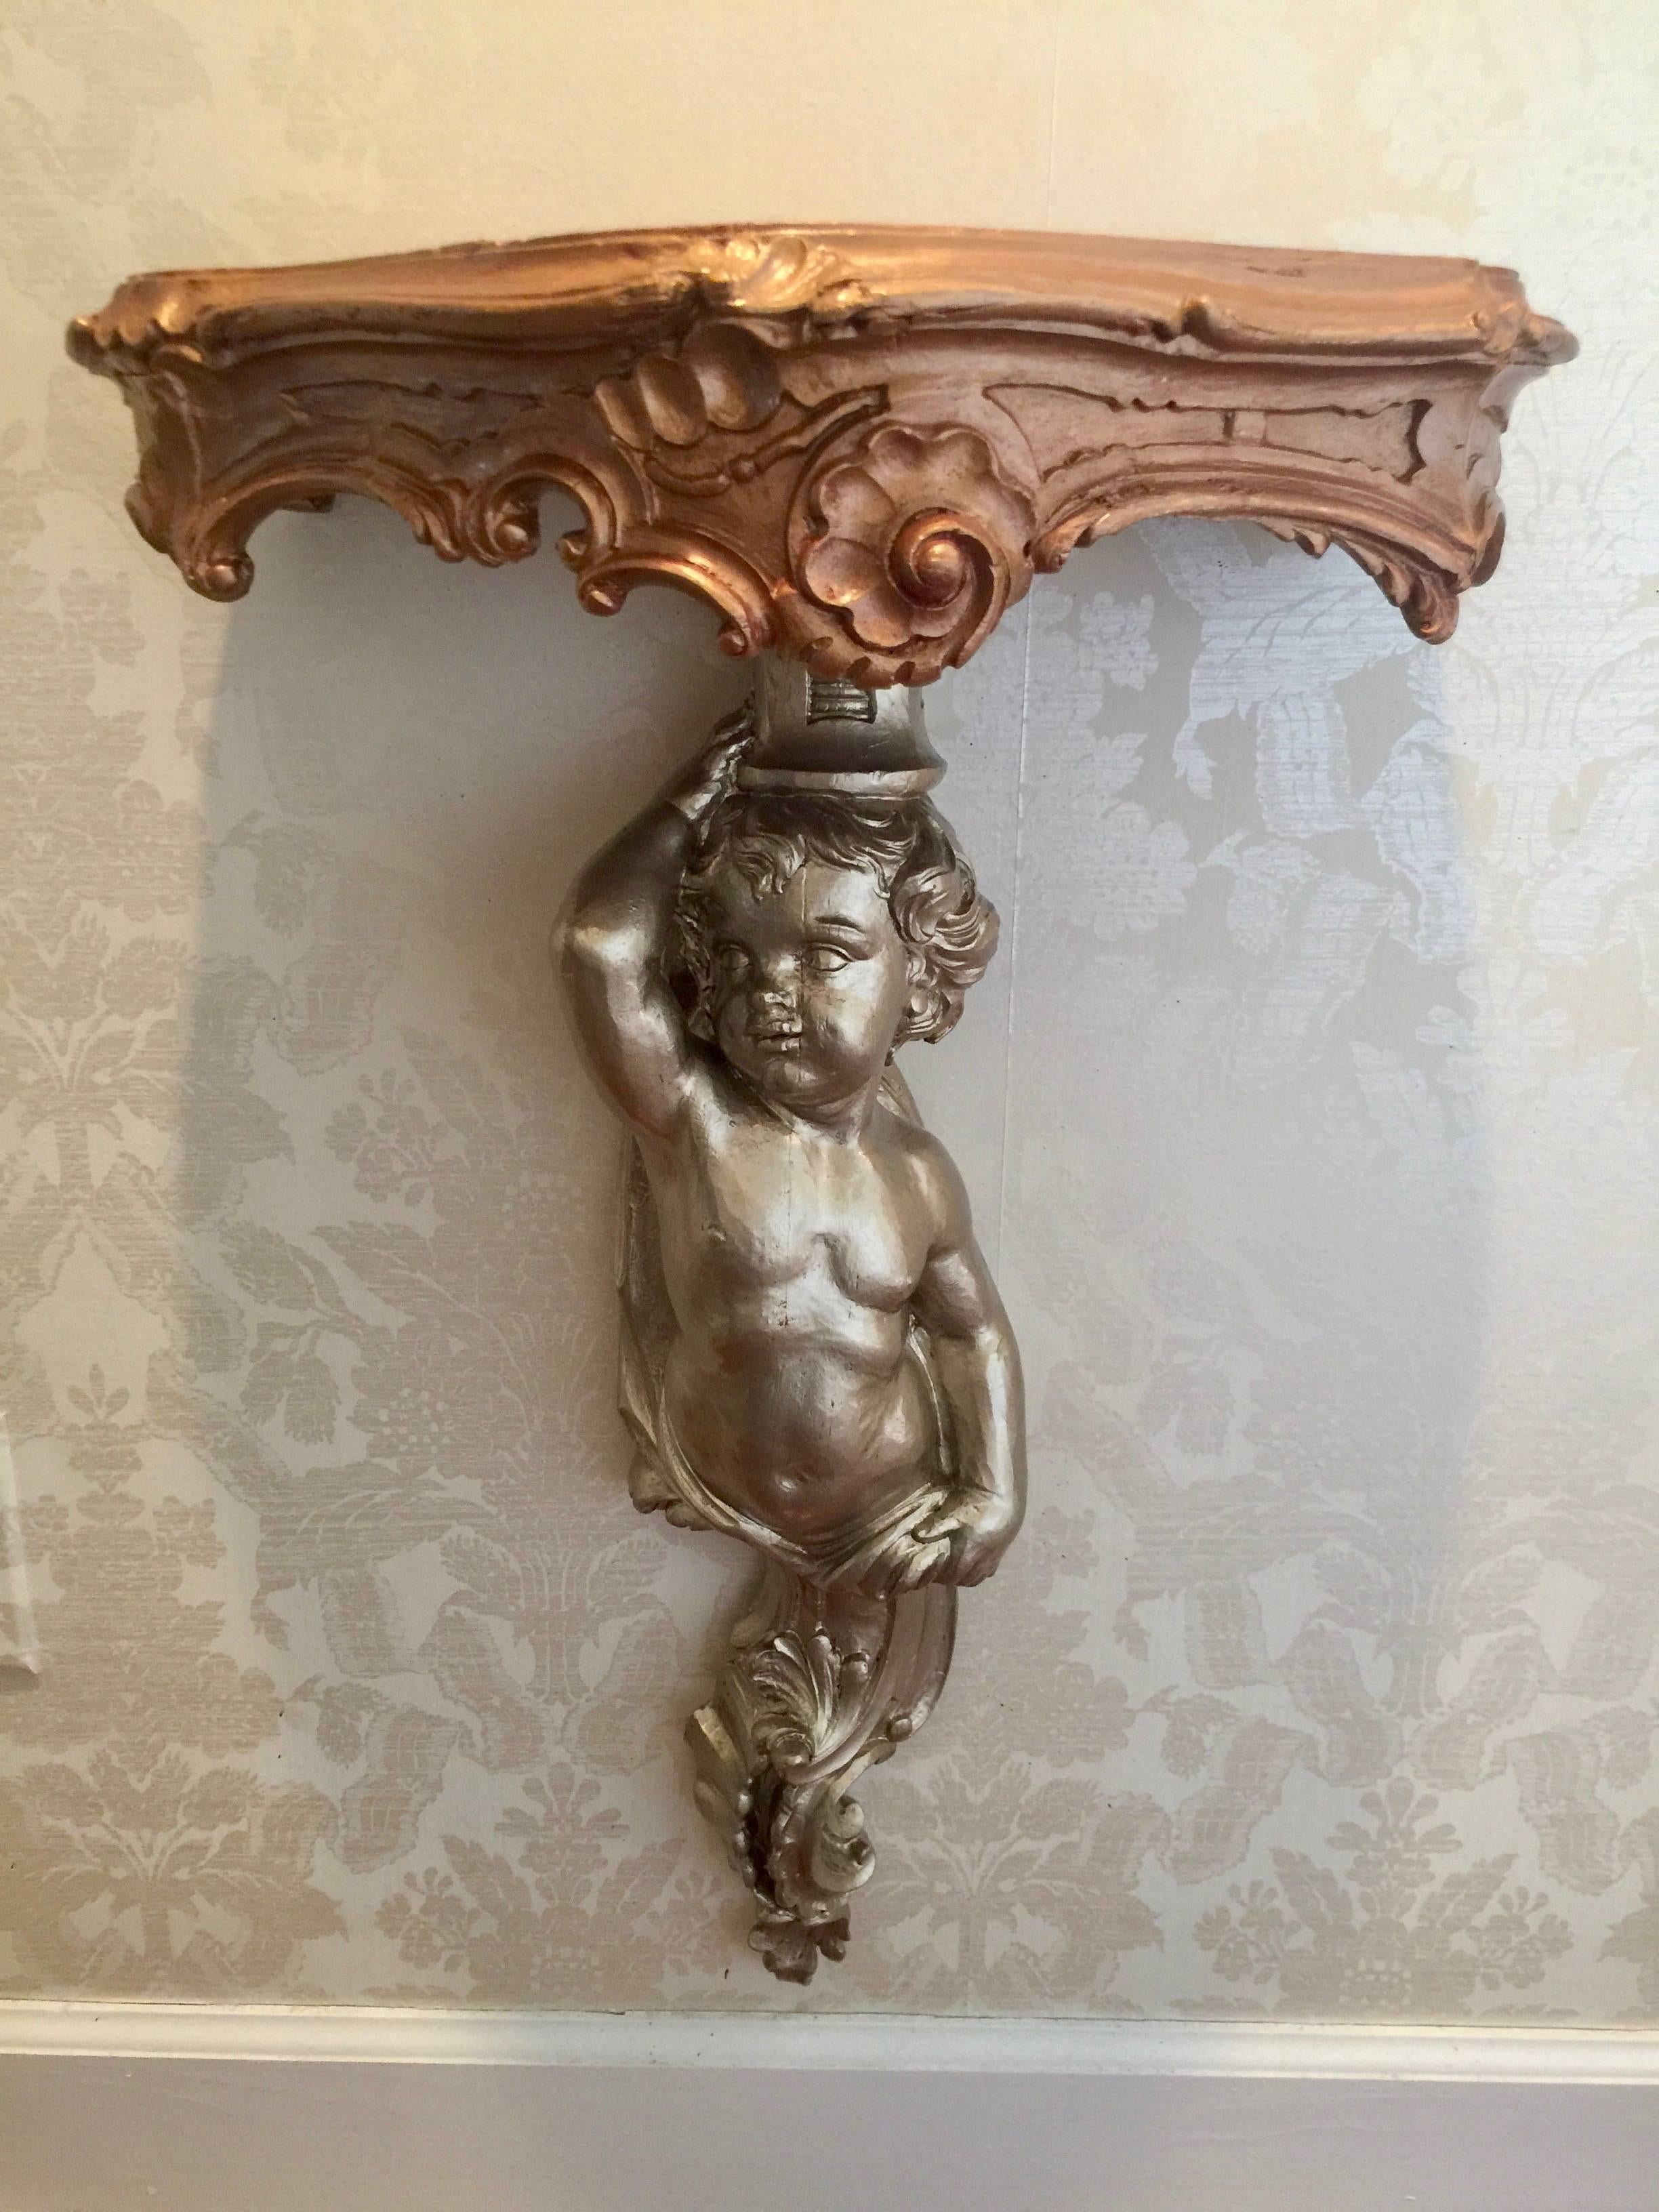 Pair of Louis XV style carved giltwood wall brackets bronze and gold in color with putto and scrolls.